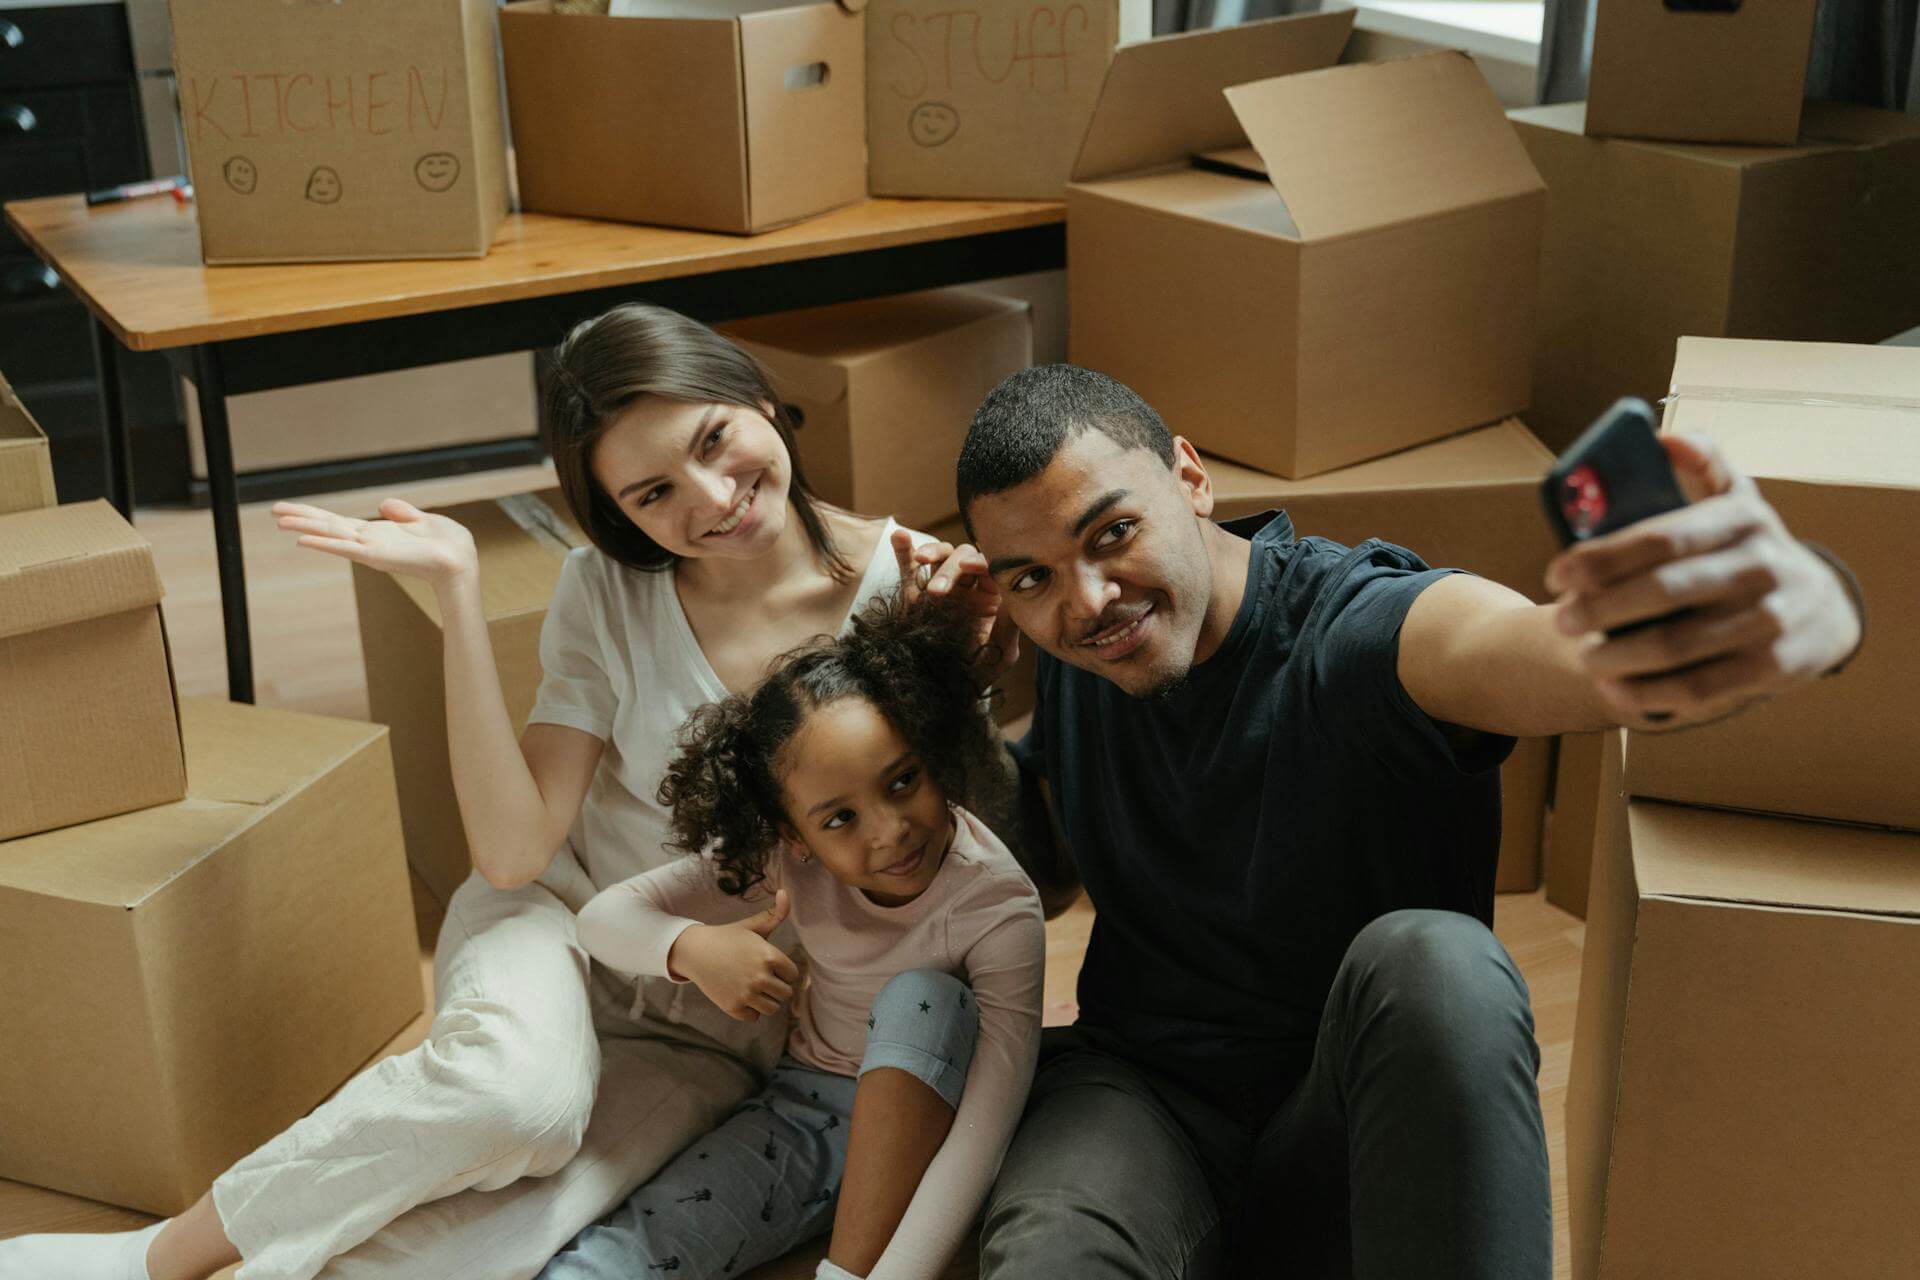 Smiling Family With Boxes Thumbs Up